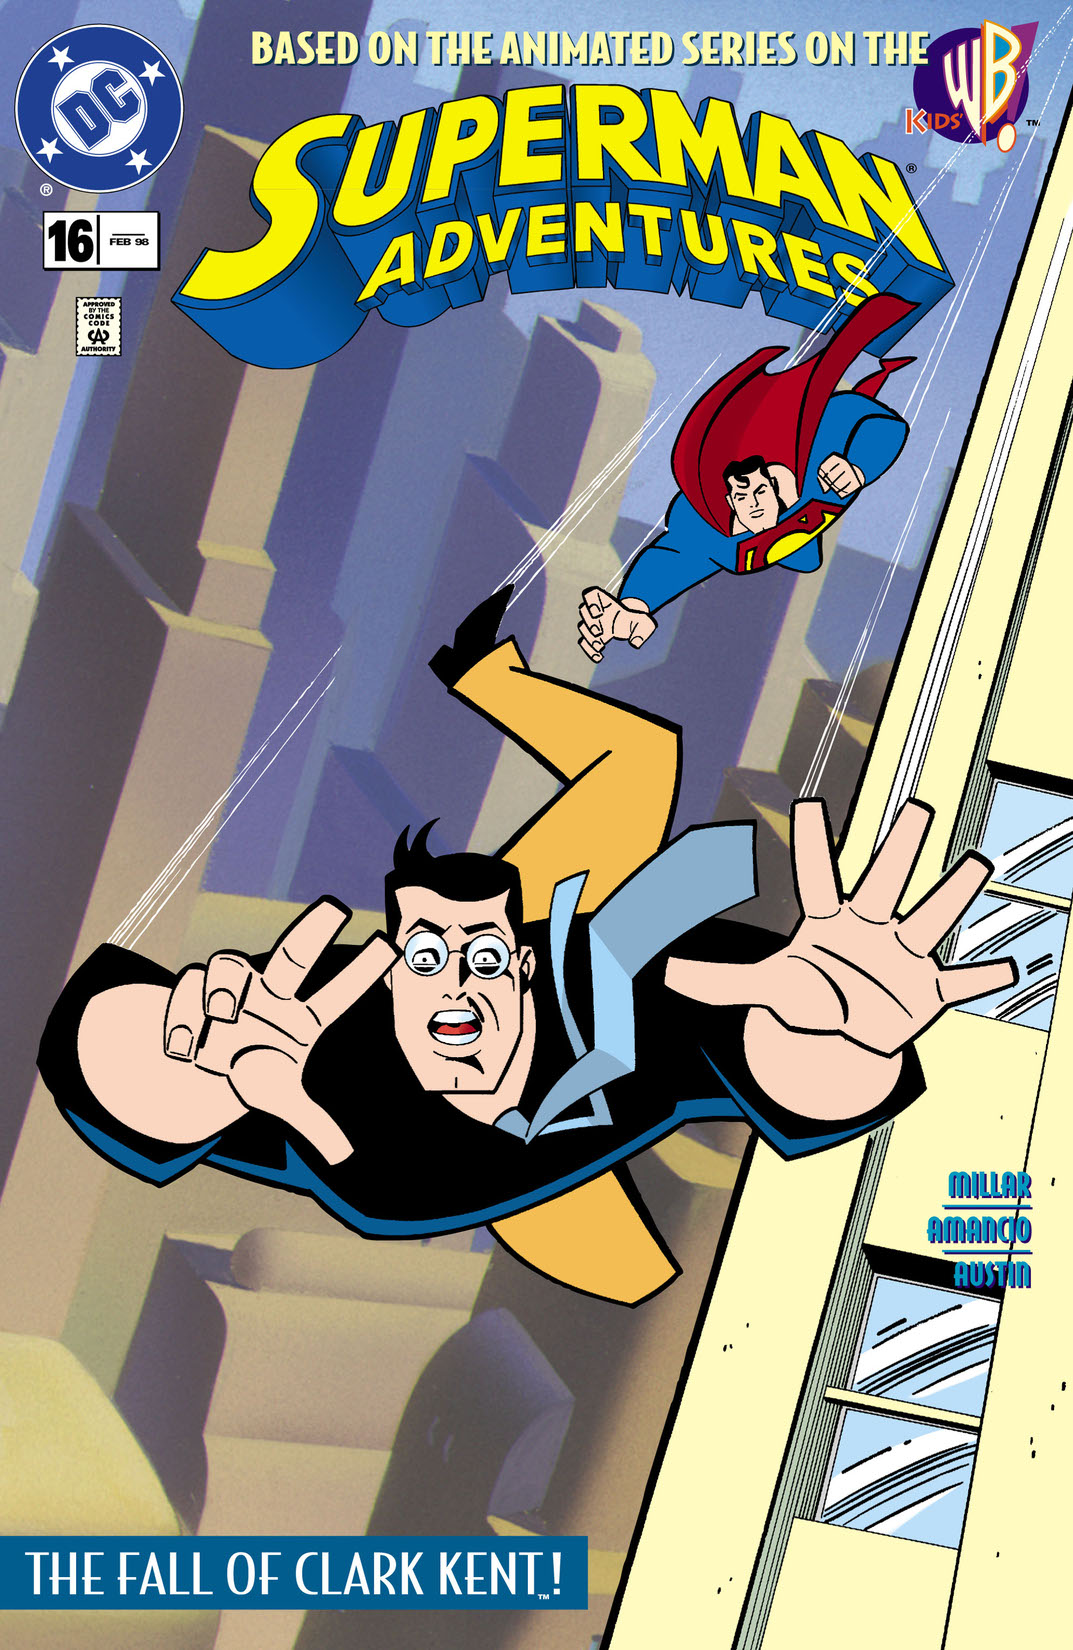 Superman Adventures #16 preview images